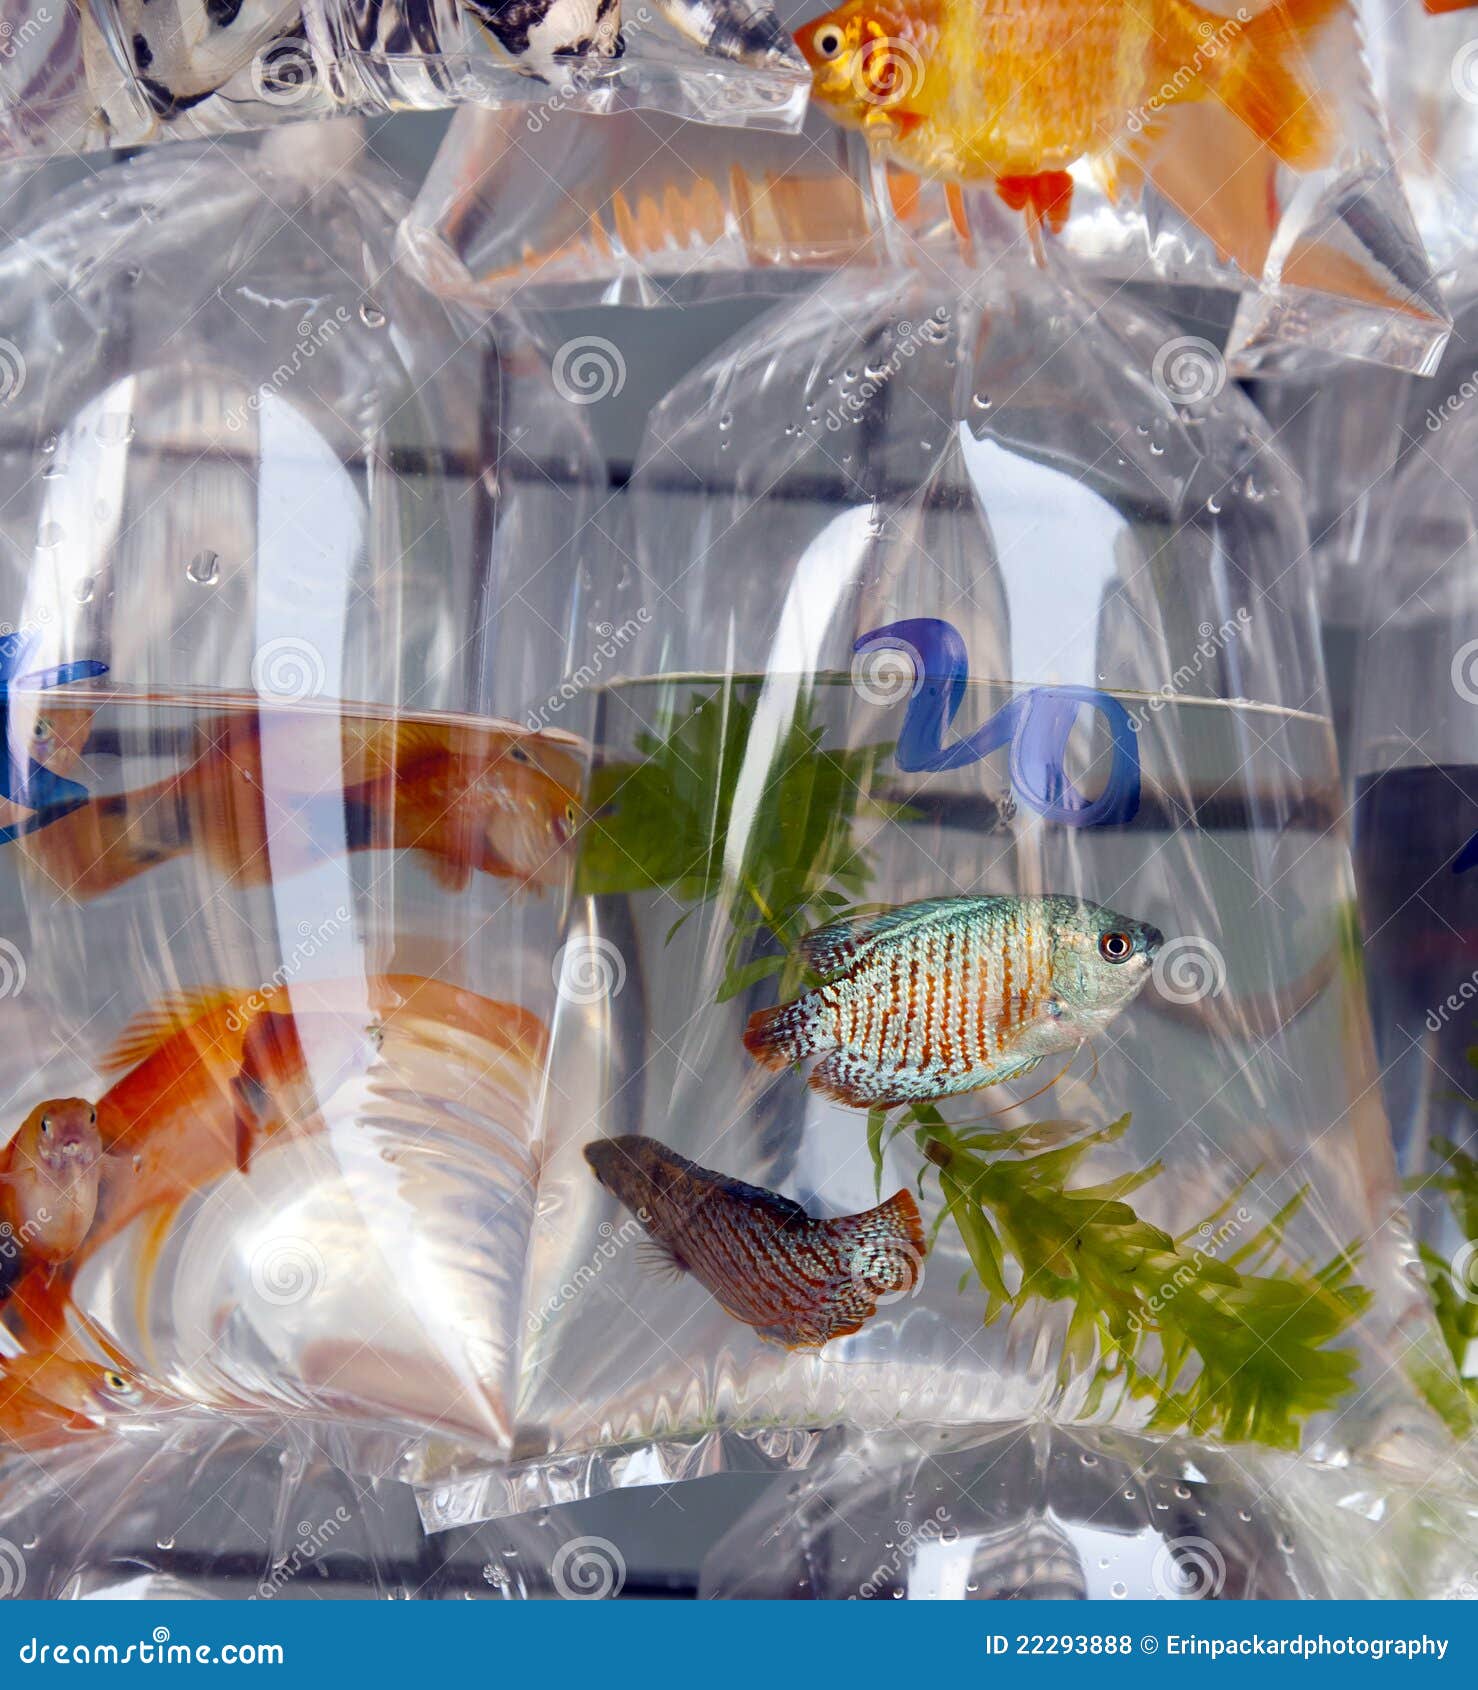 Fish for Sale in Plastic Bags Stock Photo - Image of sales, blue: 22293888